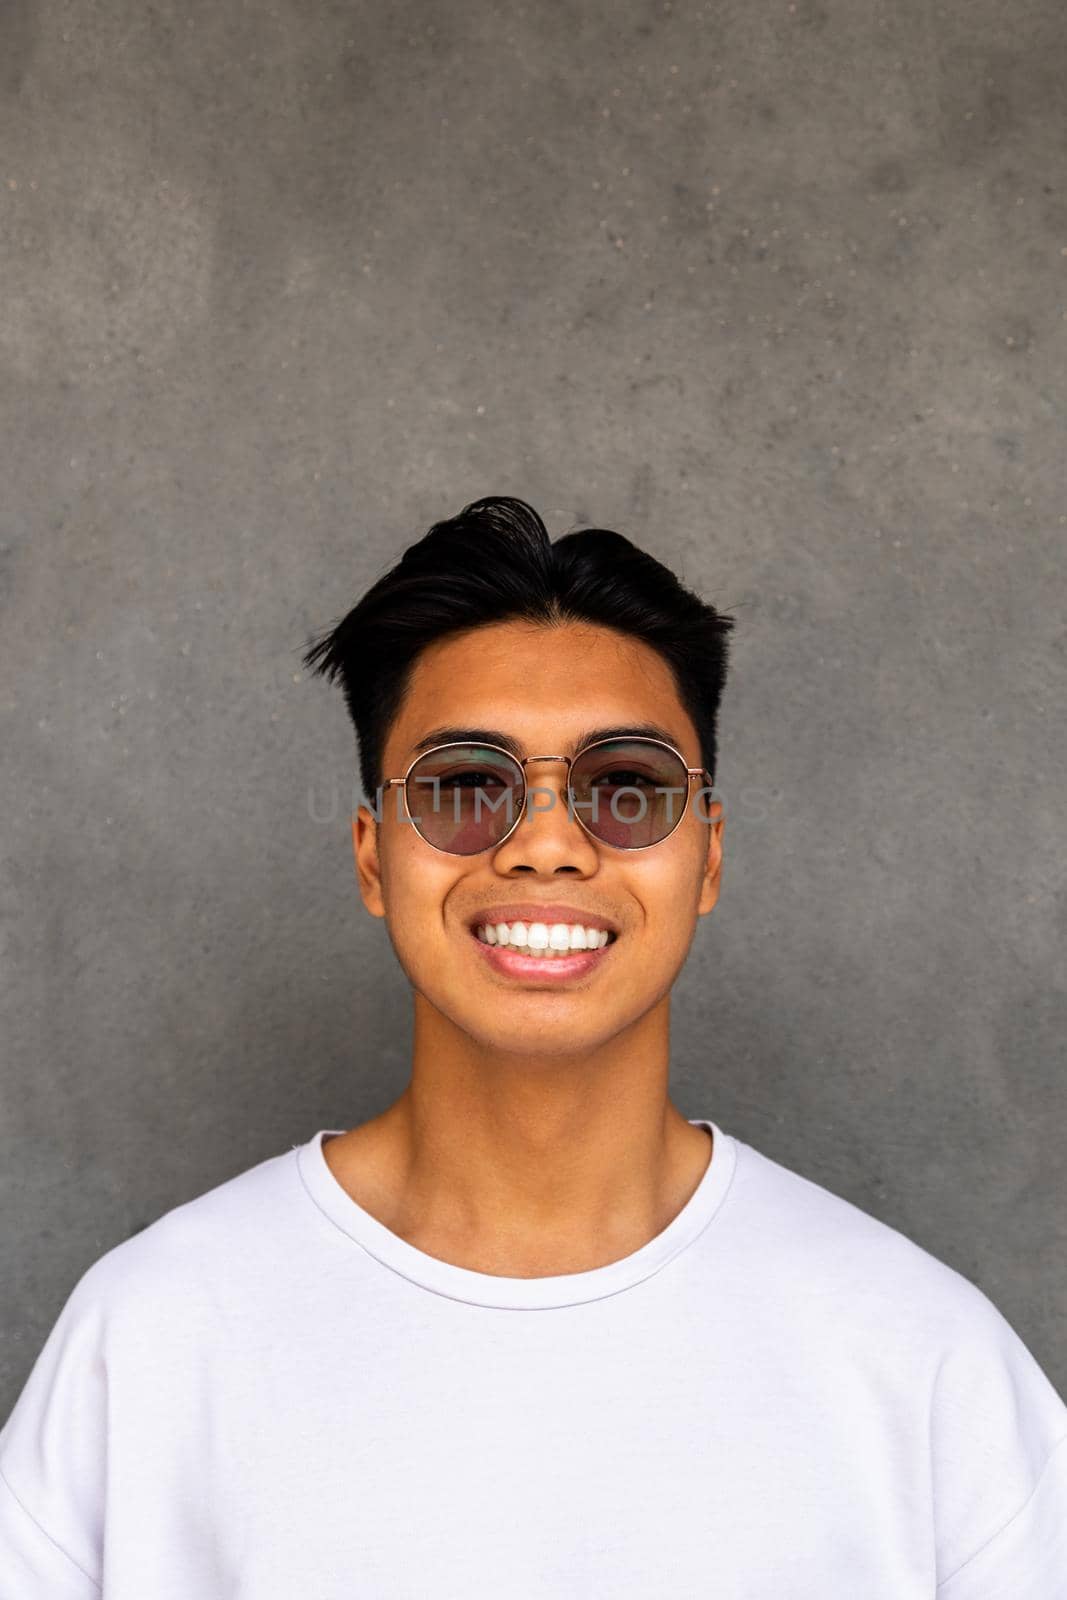 Smiling teen asian boy with glasses looking at camera. Dark concrete wall background. Vertical image. Lifestyle concept.